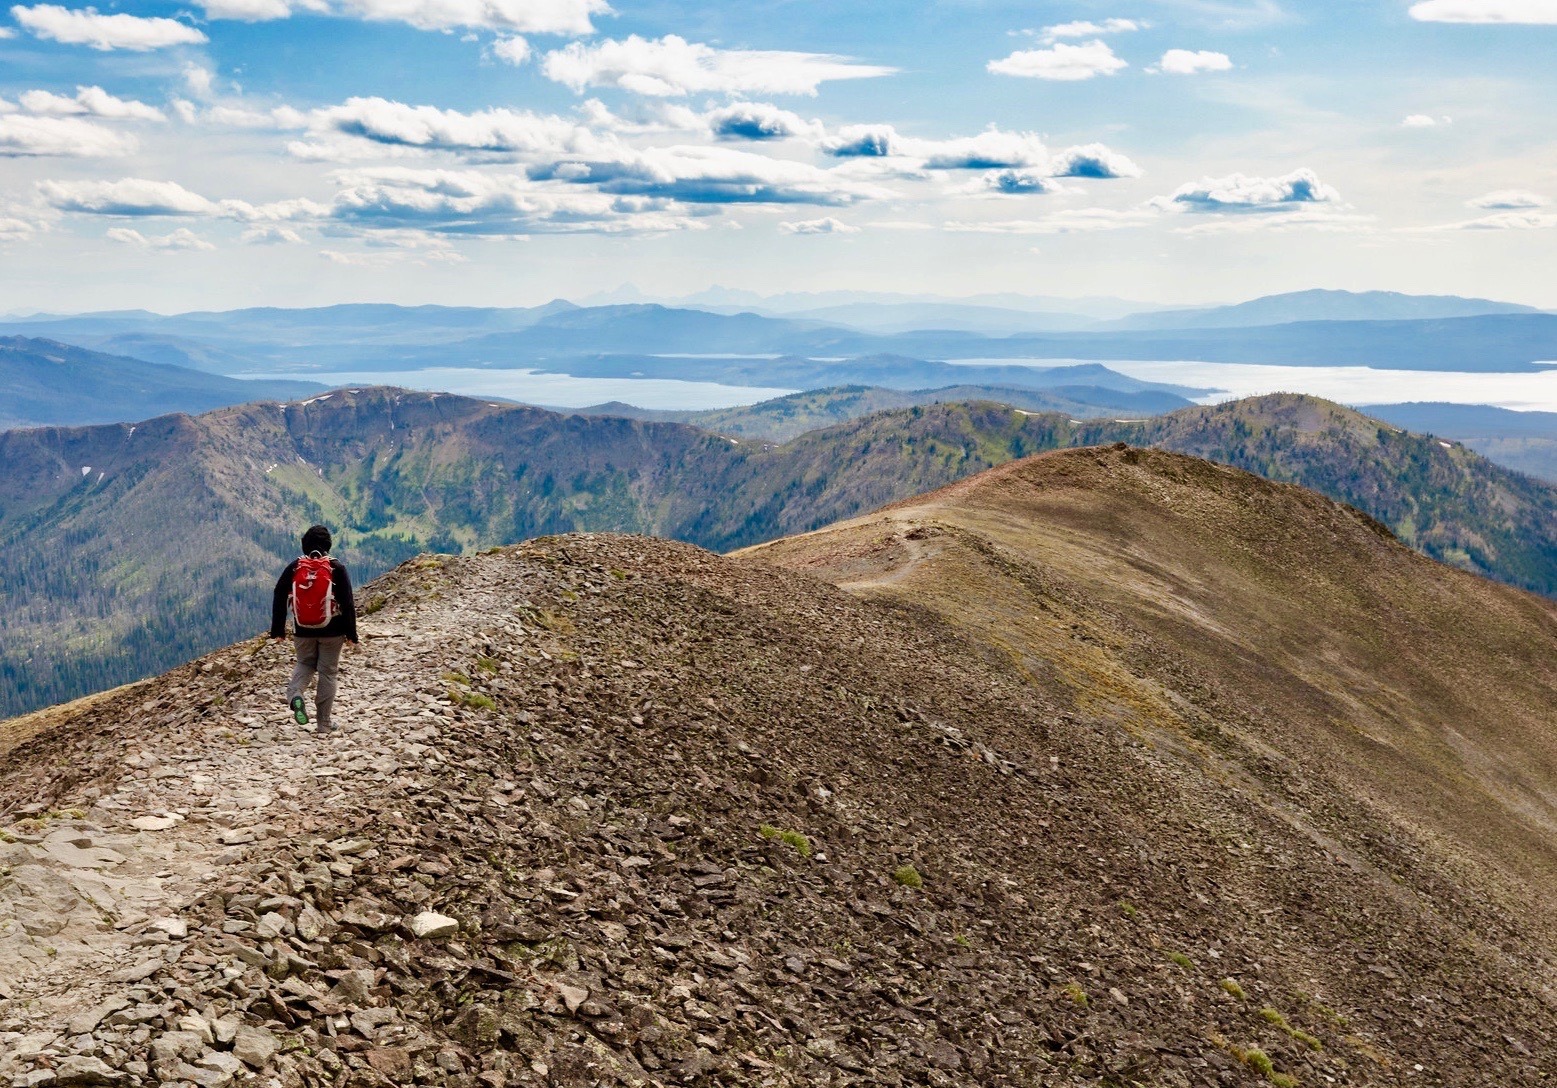 A hiker in the high country of Yellowstone—Yellowstone Lake in the distance. Photo by Jacob W. Frank/NPS